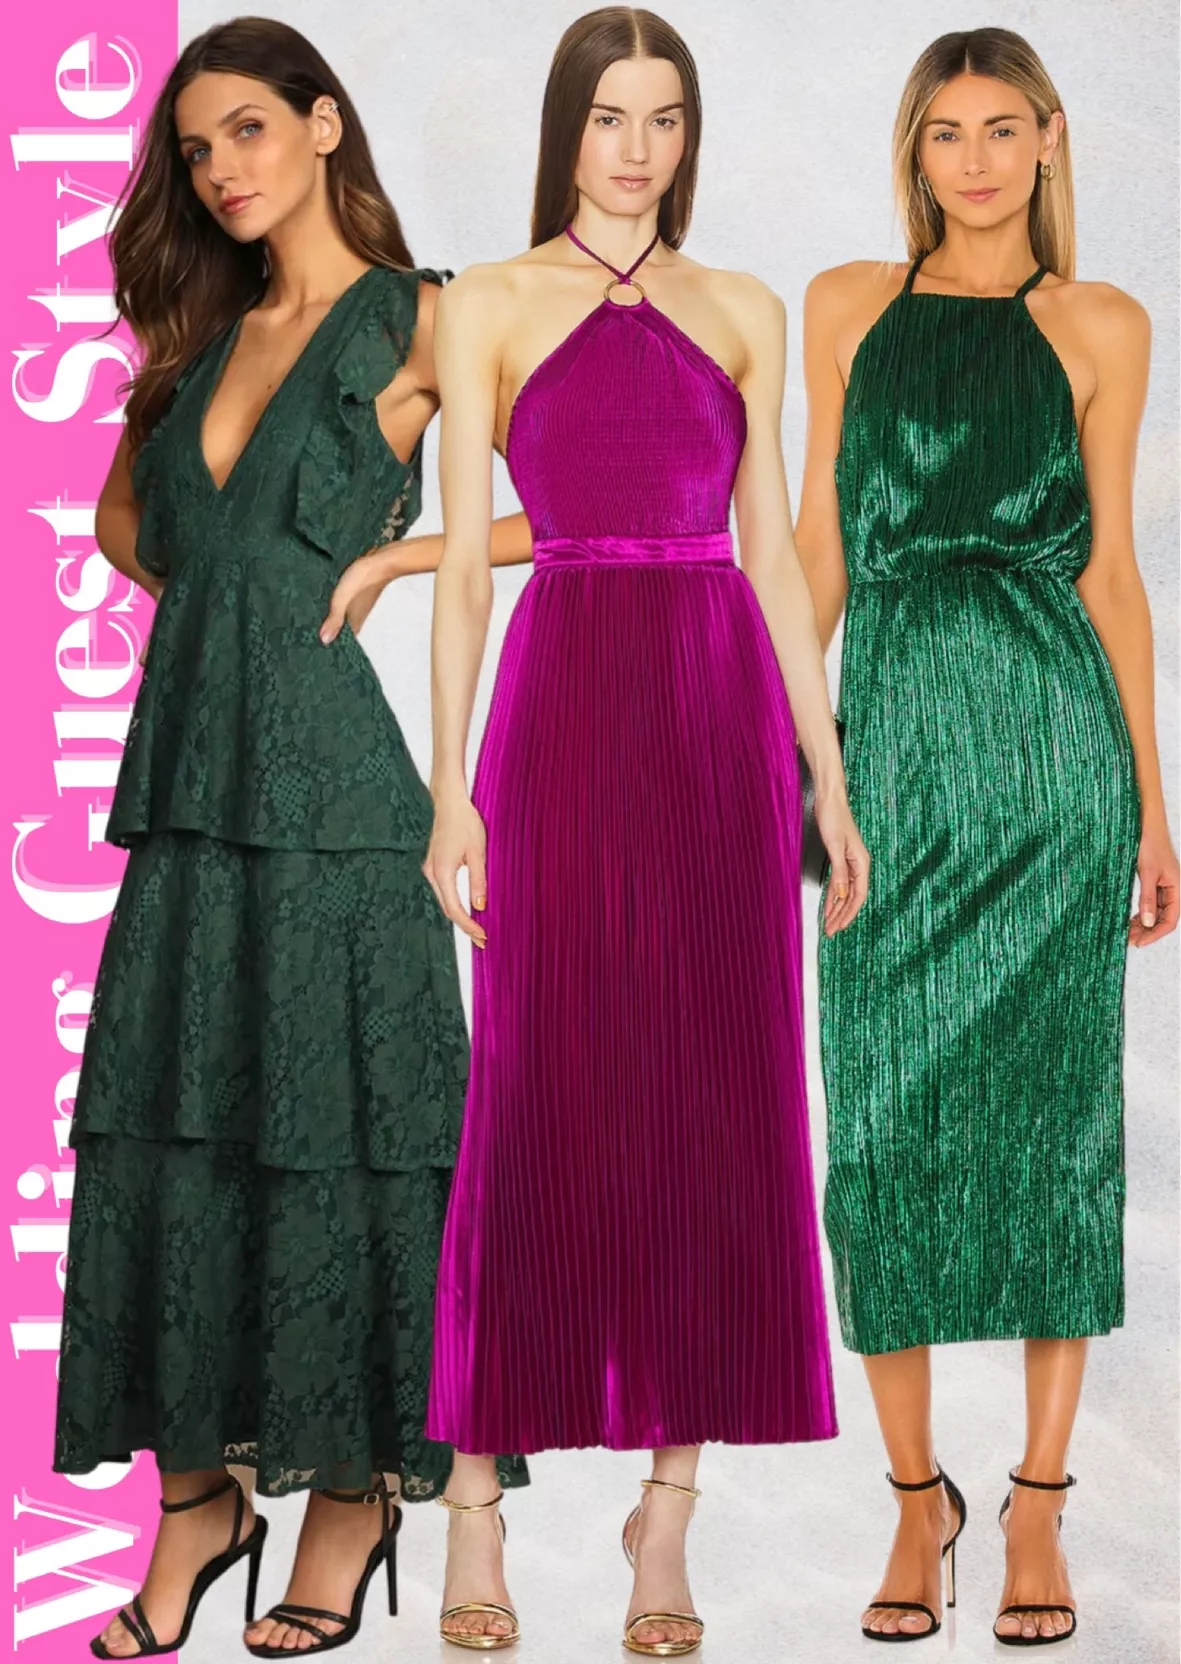 Summer Wedding Guest Dresses - Color & Chic